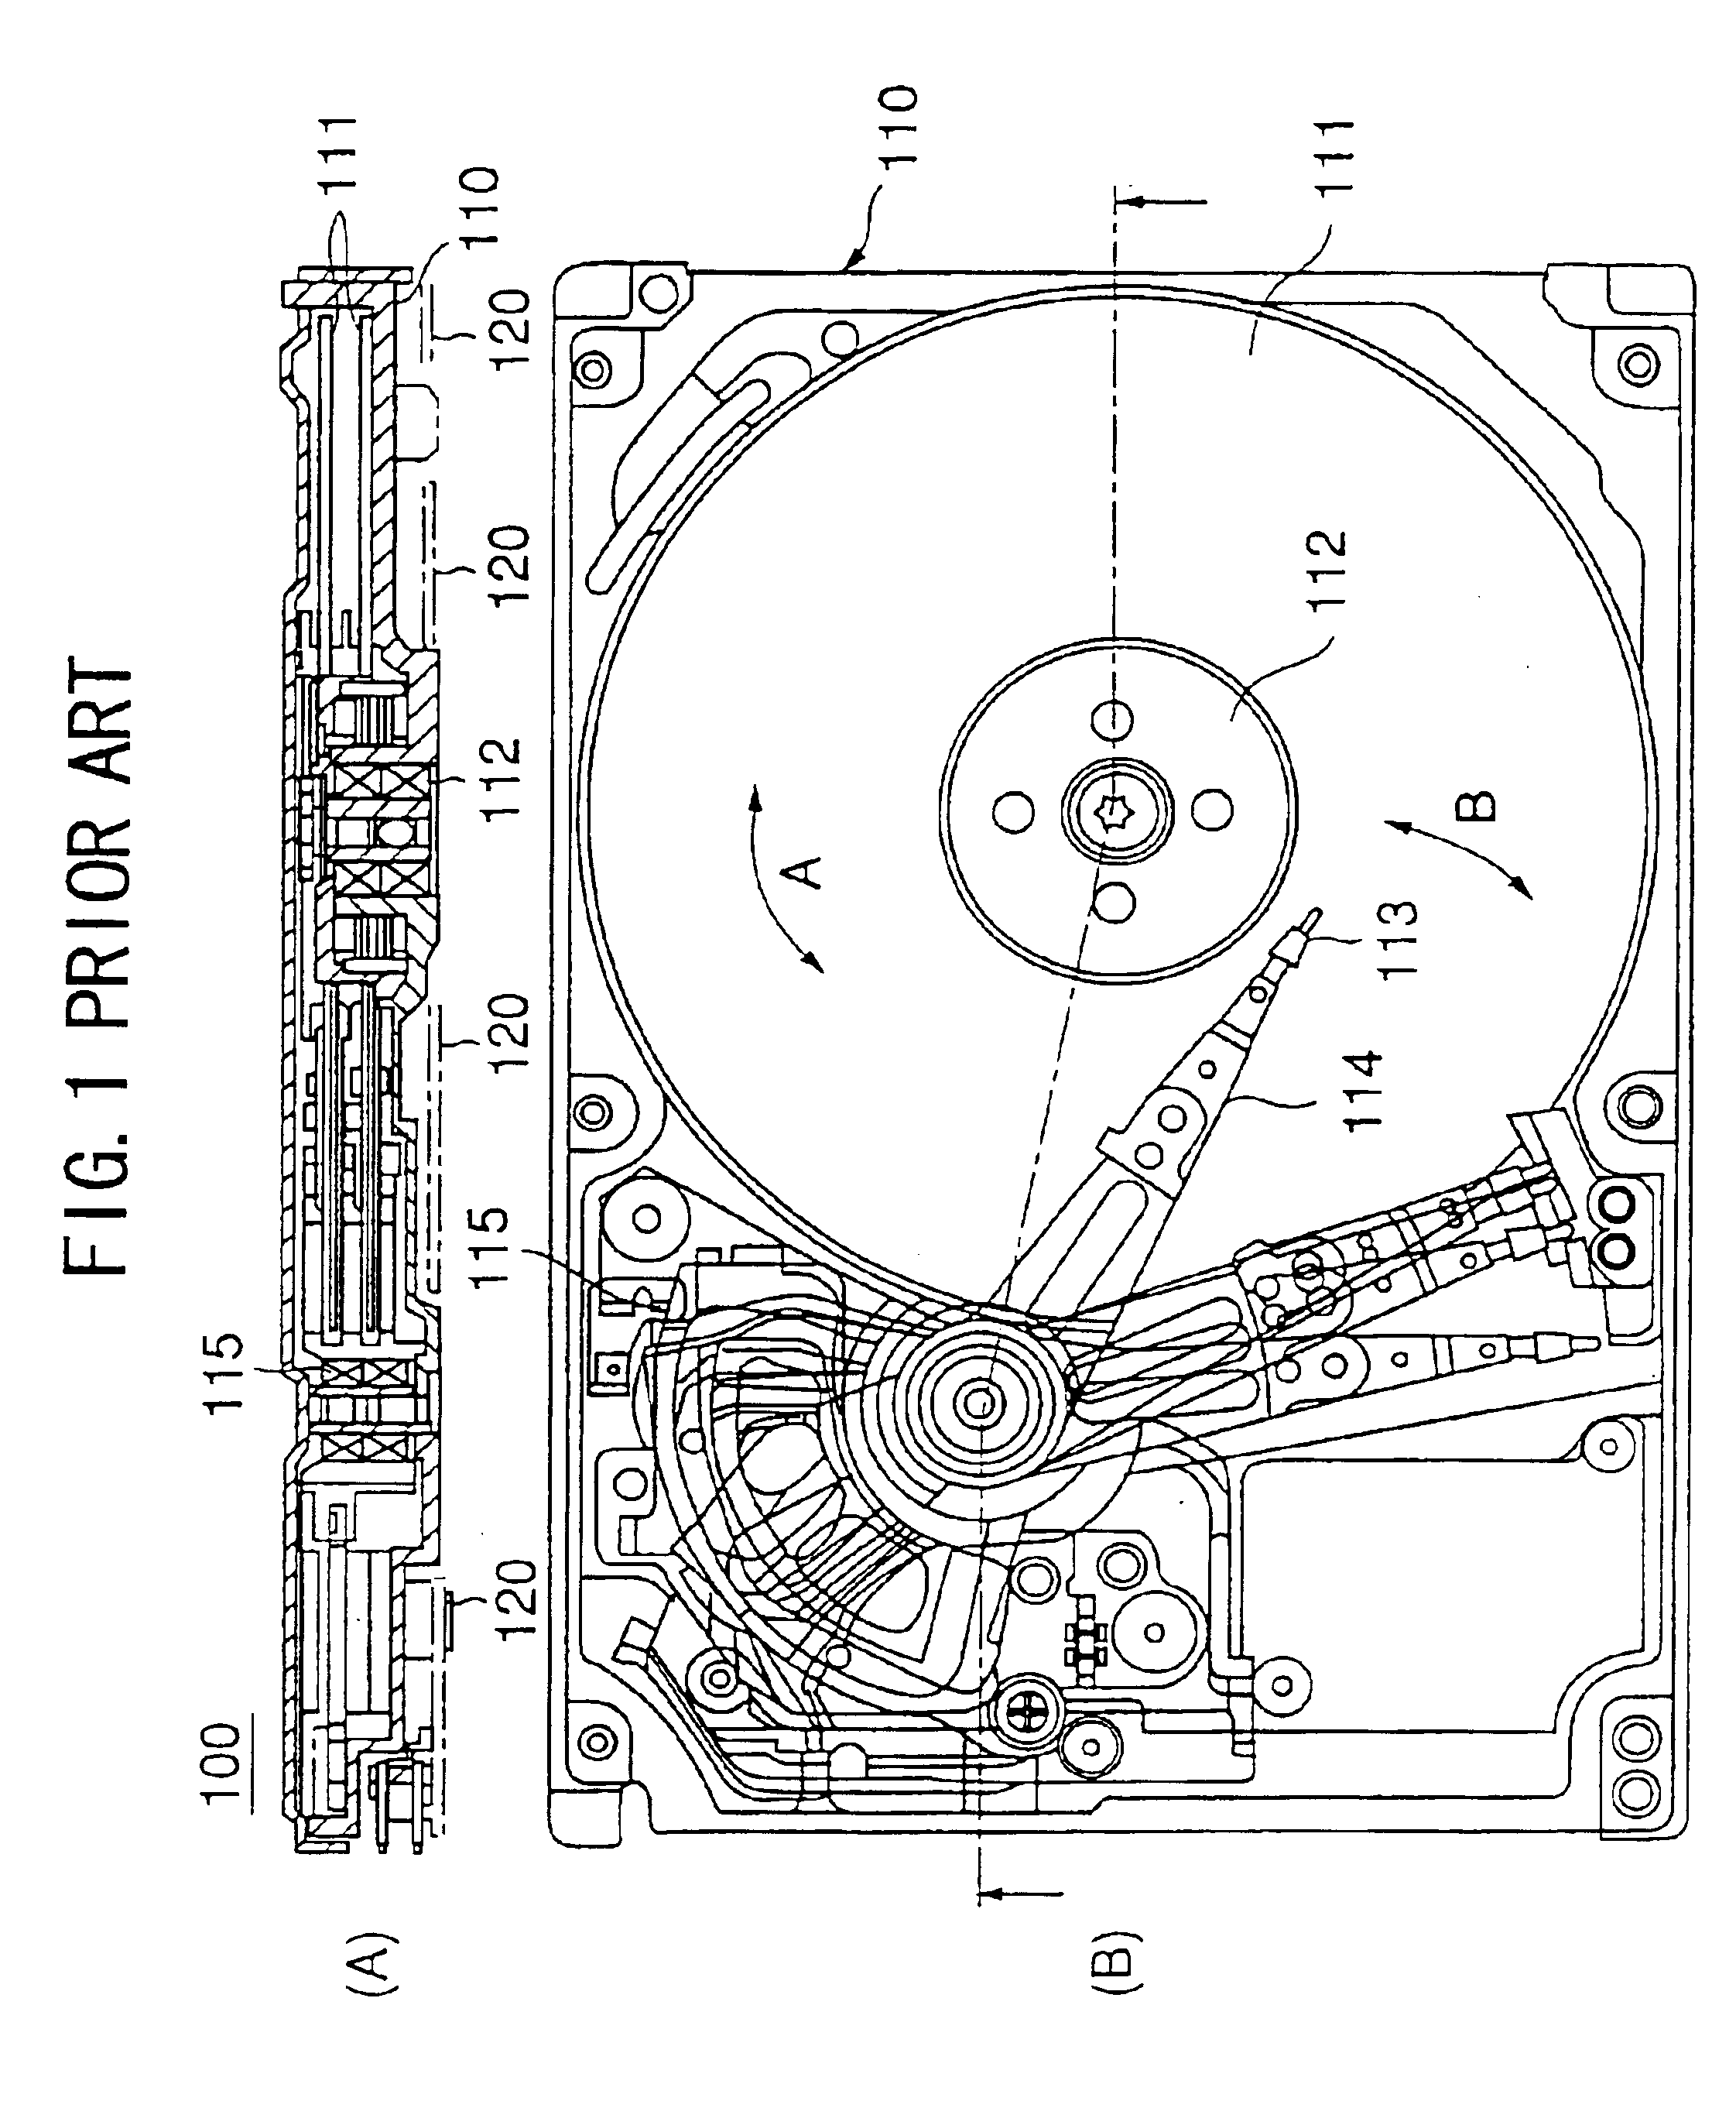 Disk device conducting a disturbance compensation based on a time-interval measurement in reading servo sectors recorded on a disk